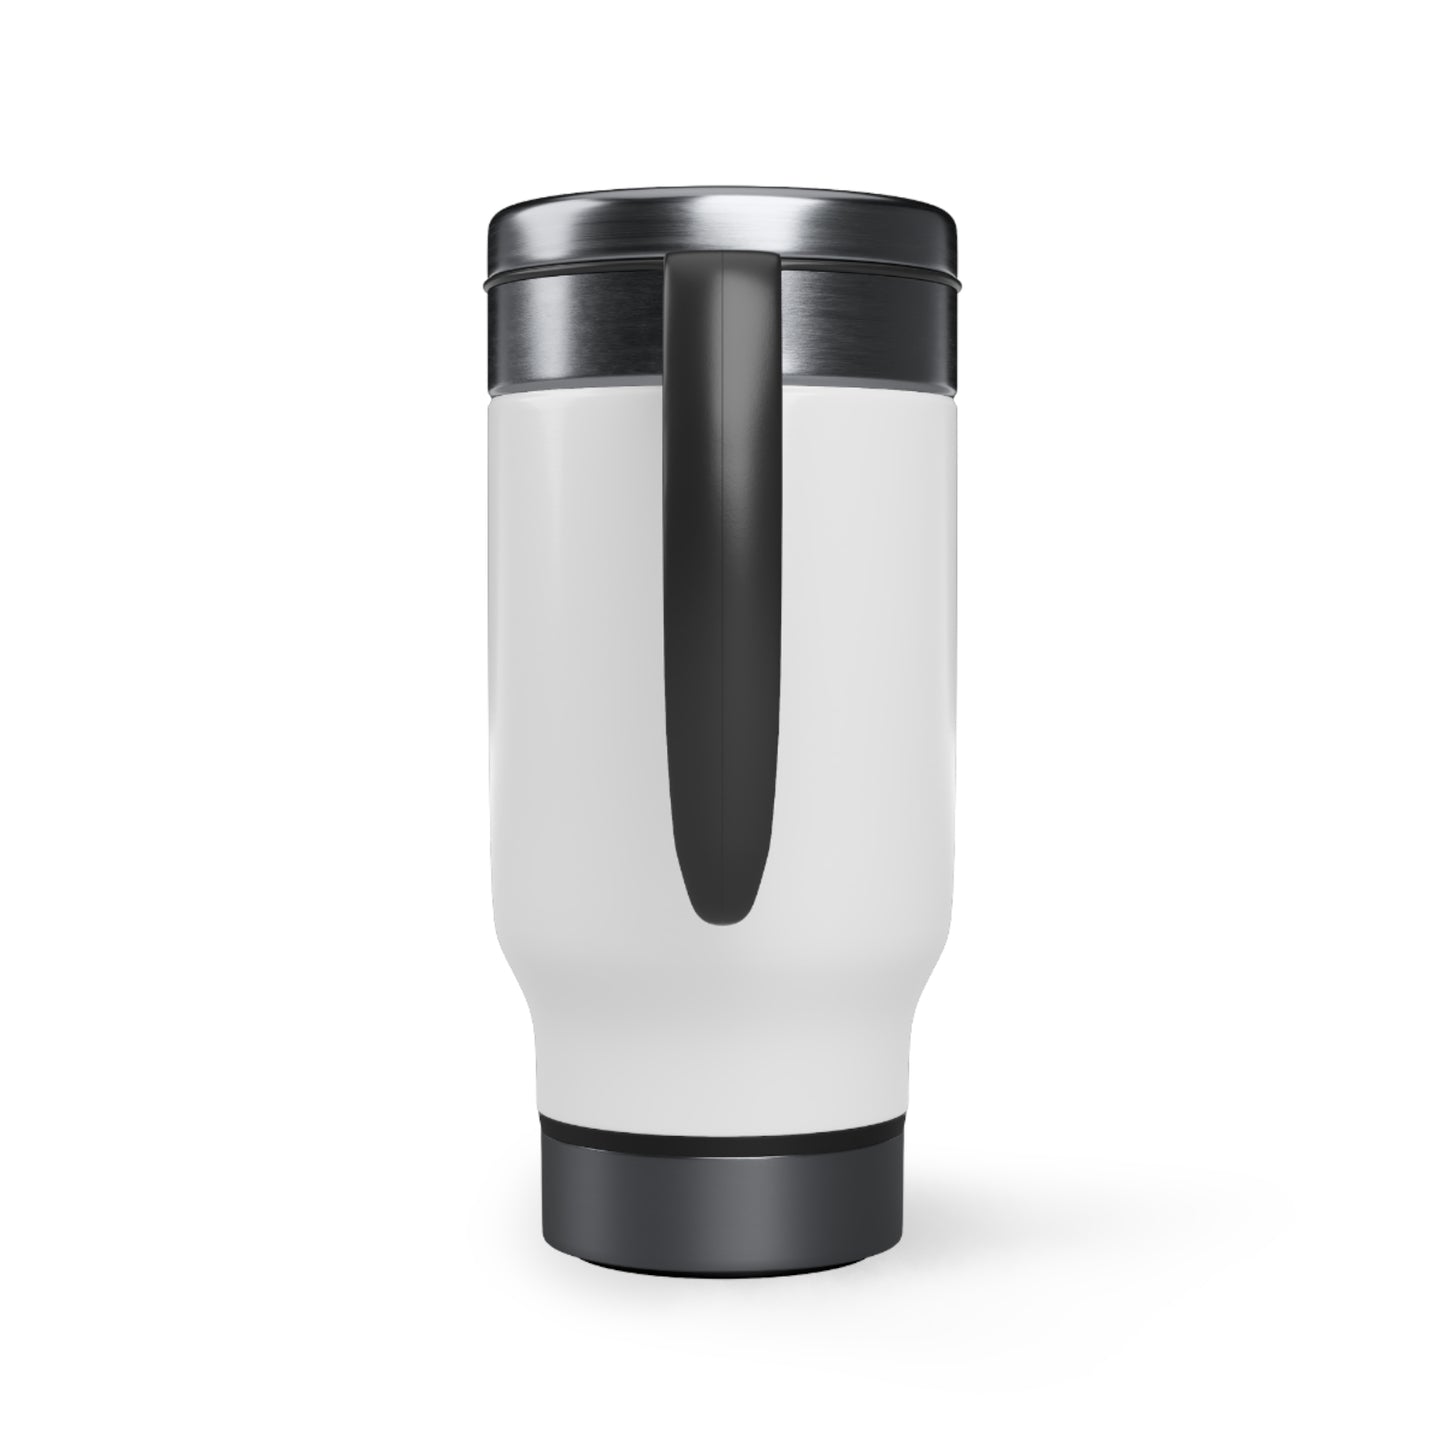 Underwater life - Stainless Steel Travel Mug with Handle, 14oz